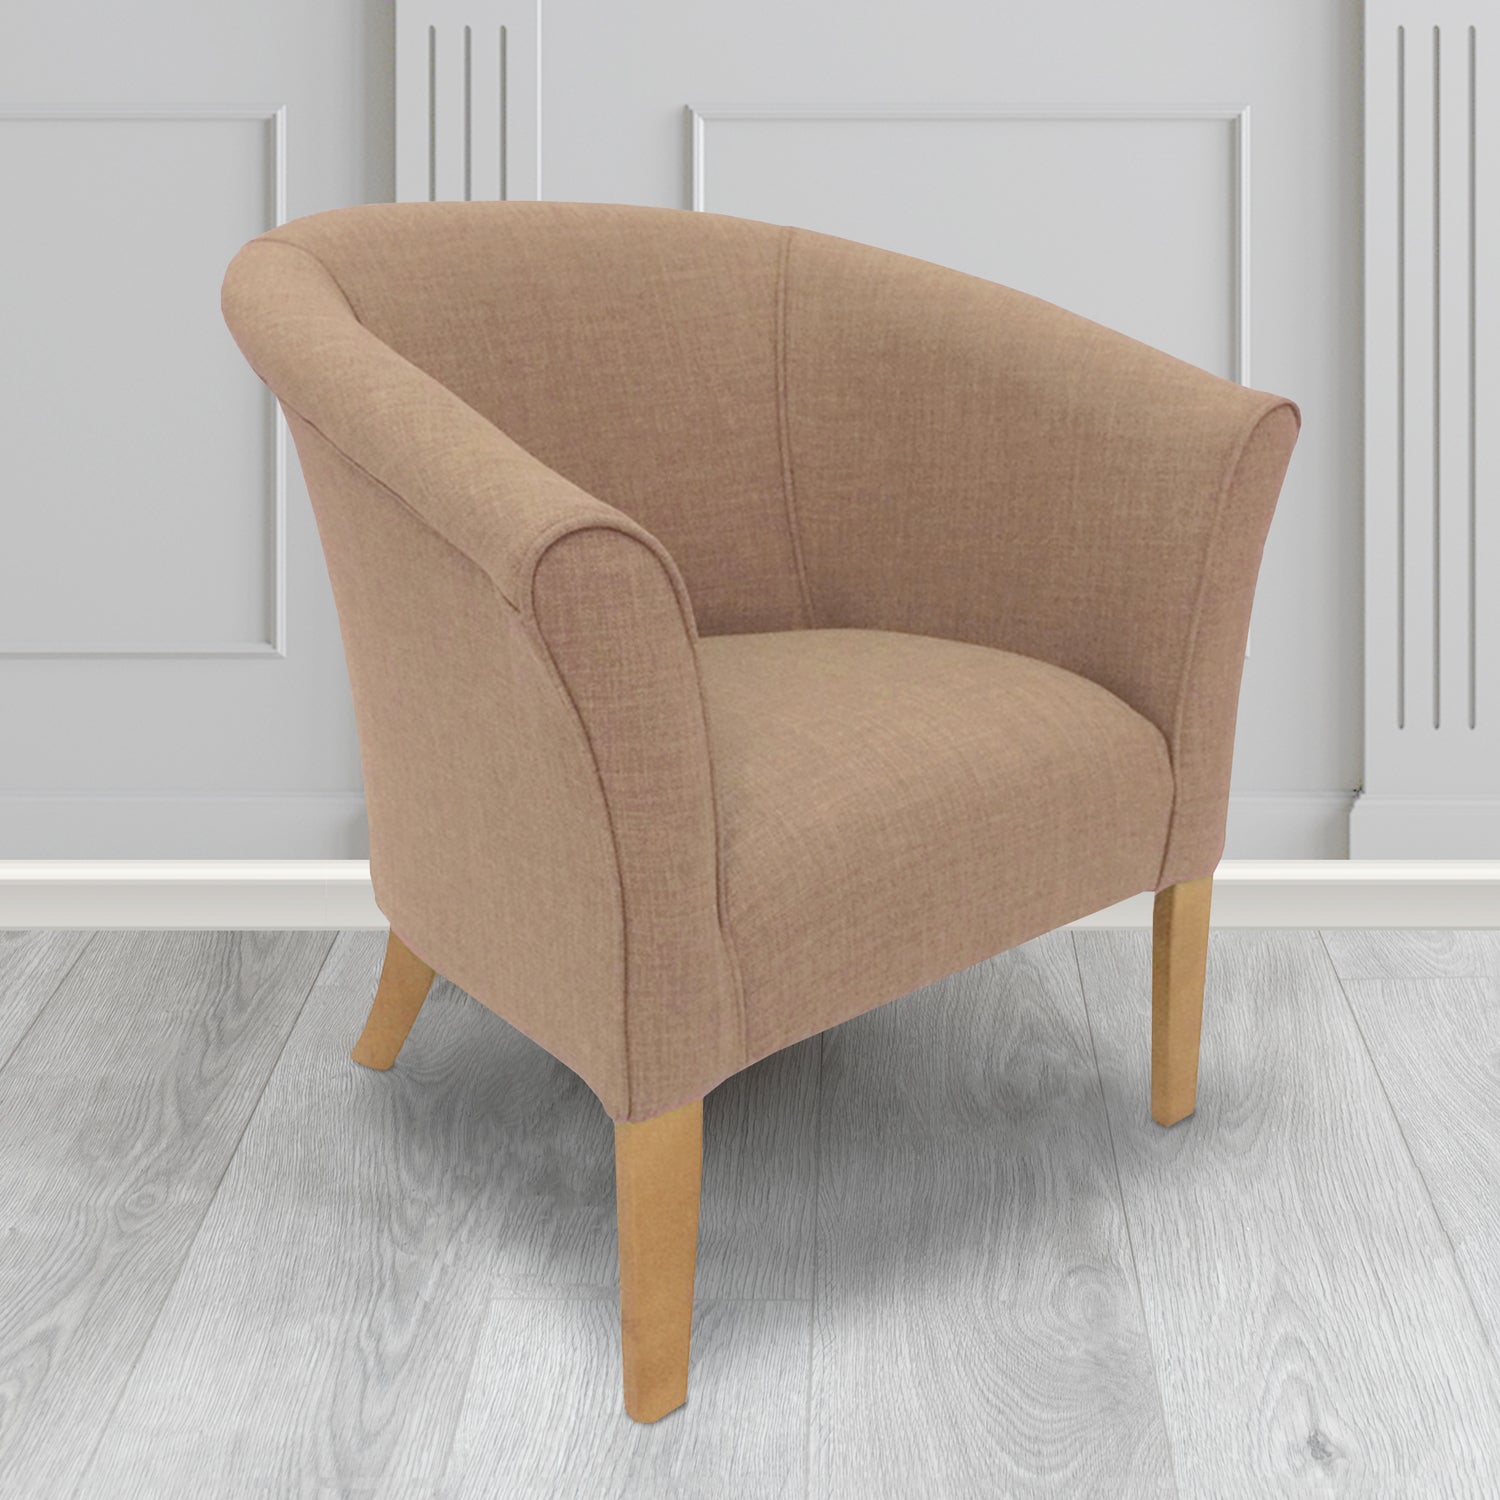 Quill Tub Chair in Linetta Sand Crib 5 Plain Fabric - Antimicrobial, Stain Resistant & Waterproof - The Tub Chair Shop